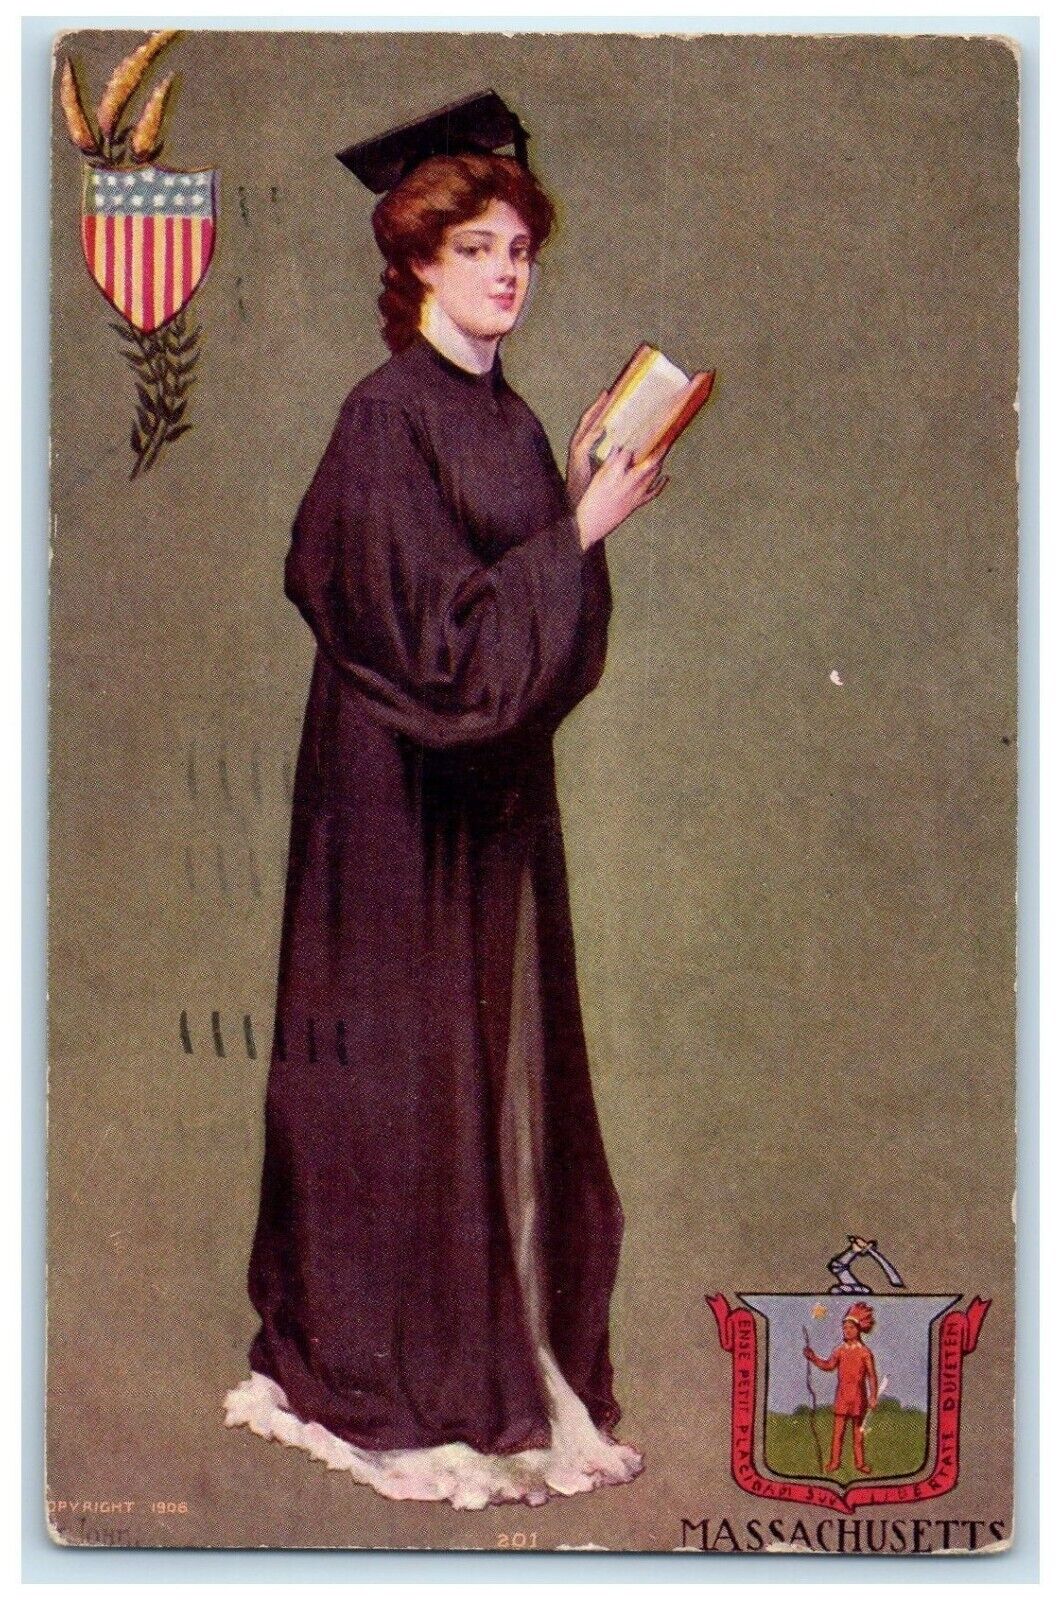 1908 Graduating Woman Holding Book Massachusetts Vintage Antique Posted Postcard